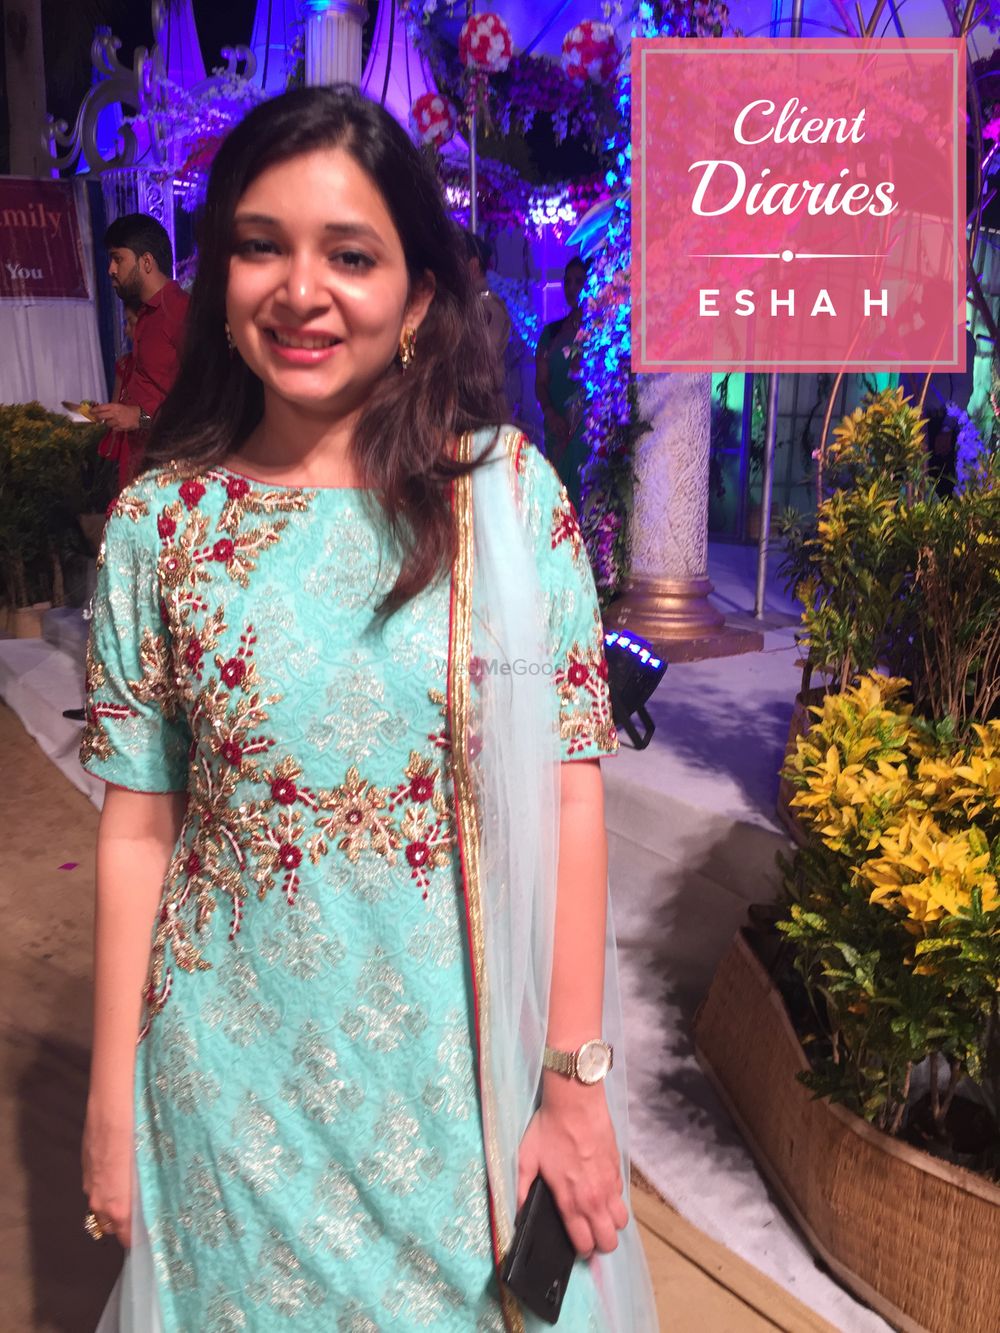 Photo From CLIENT DIARIES - By Esha H